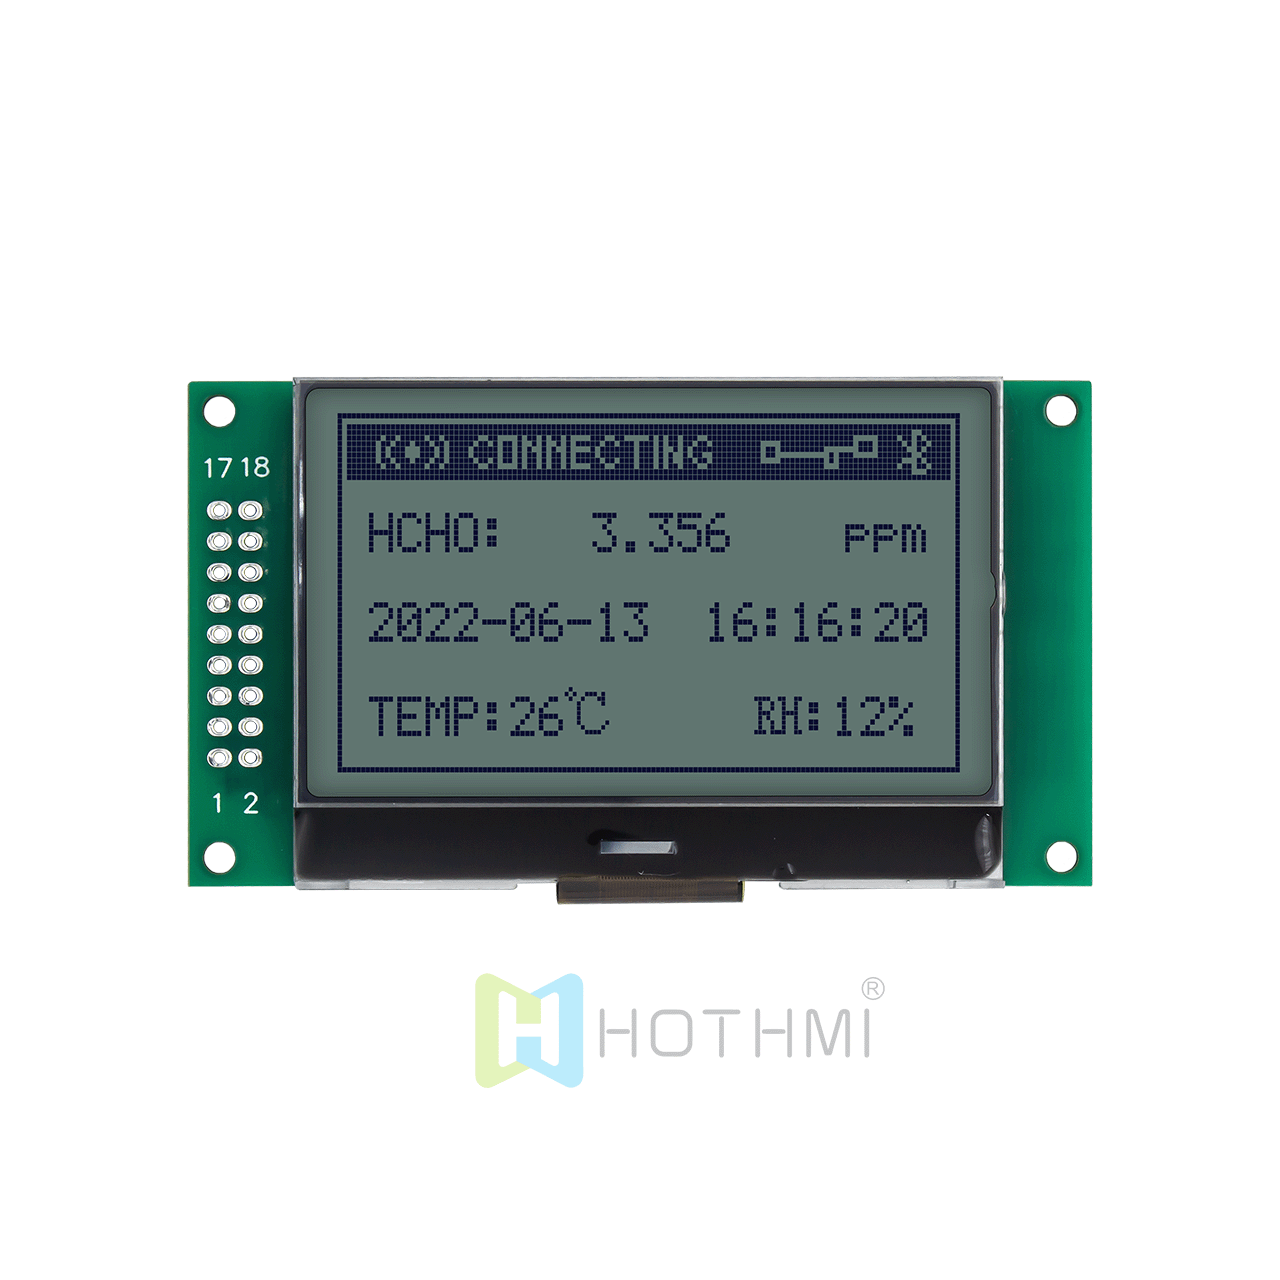 2.4-inch 132x64 LCD graphic module/13264 graphic module/ST7565R/parallel port/can be used with Arduino/Raspberry Pi